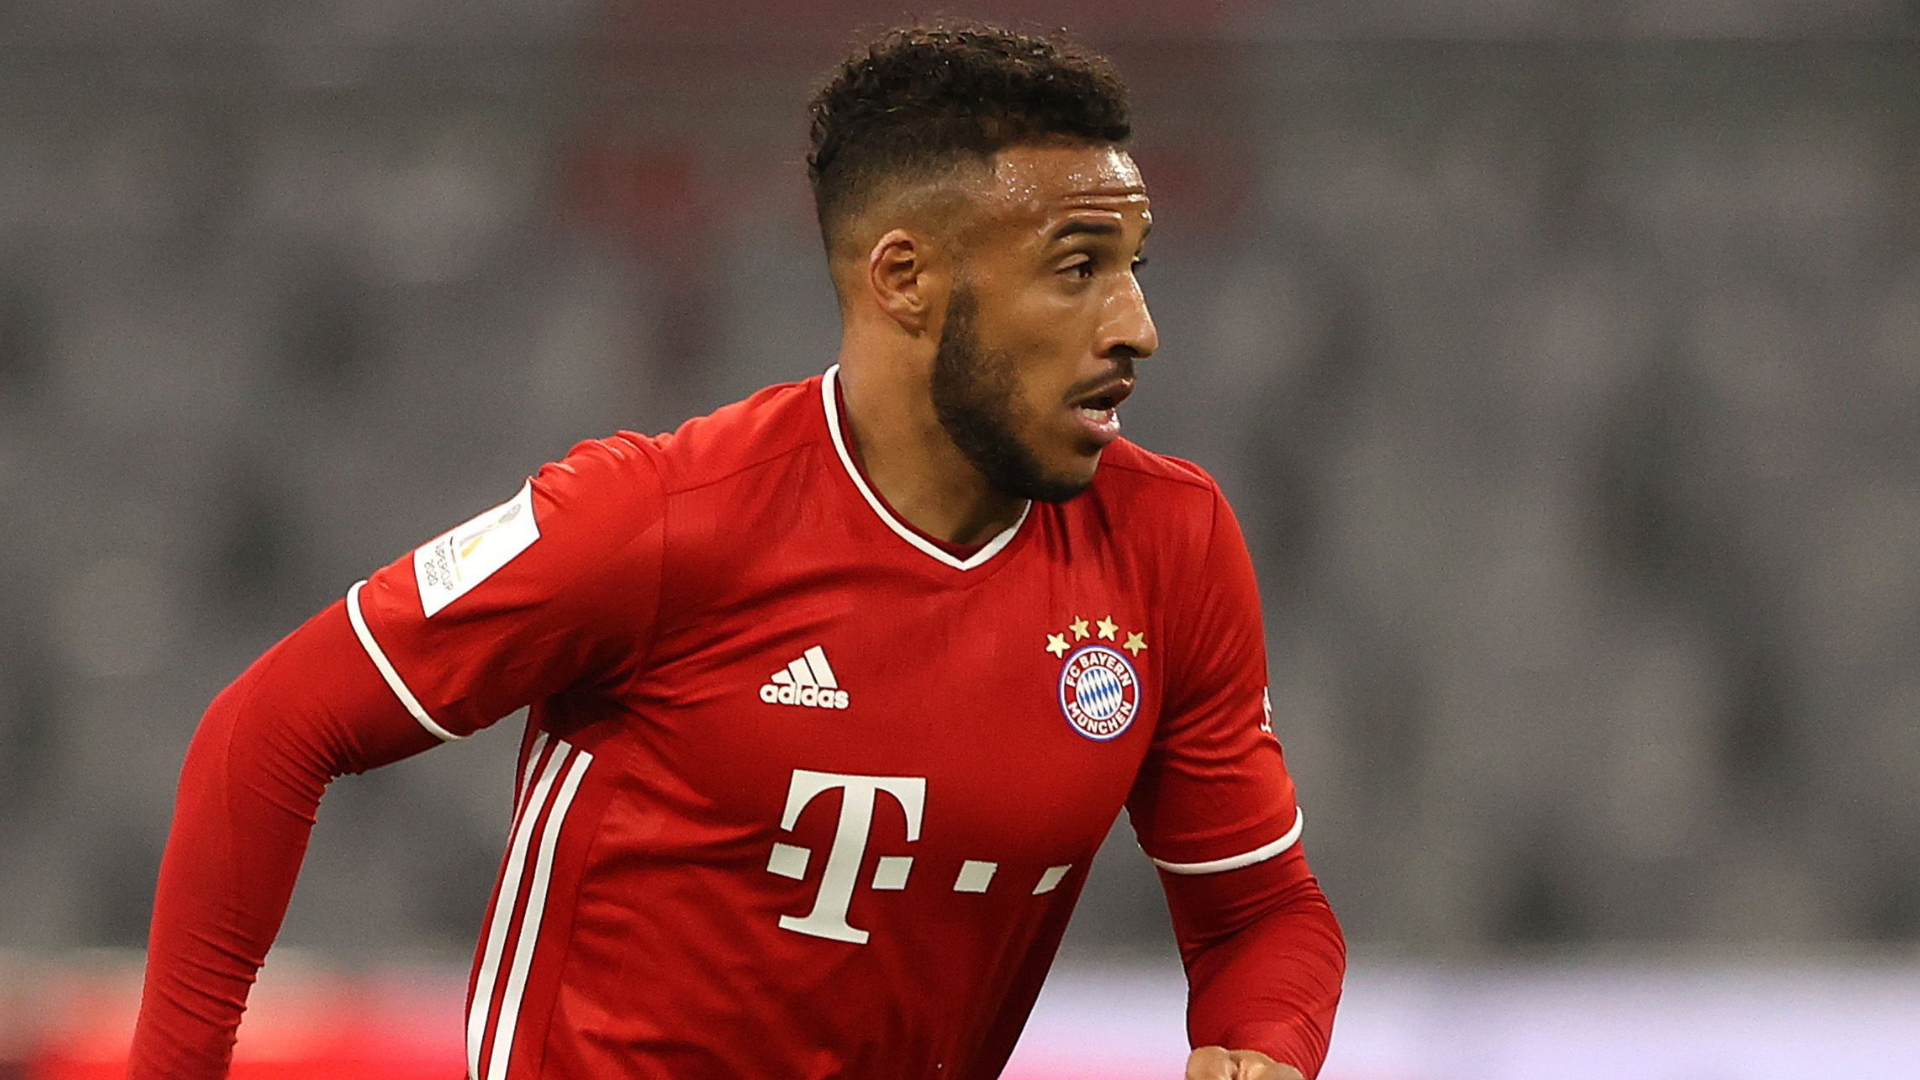 Tolisso Fined And Dropped By Bayern Munich After Breaking Covid 19 Rules To Get A Tattoo